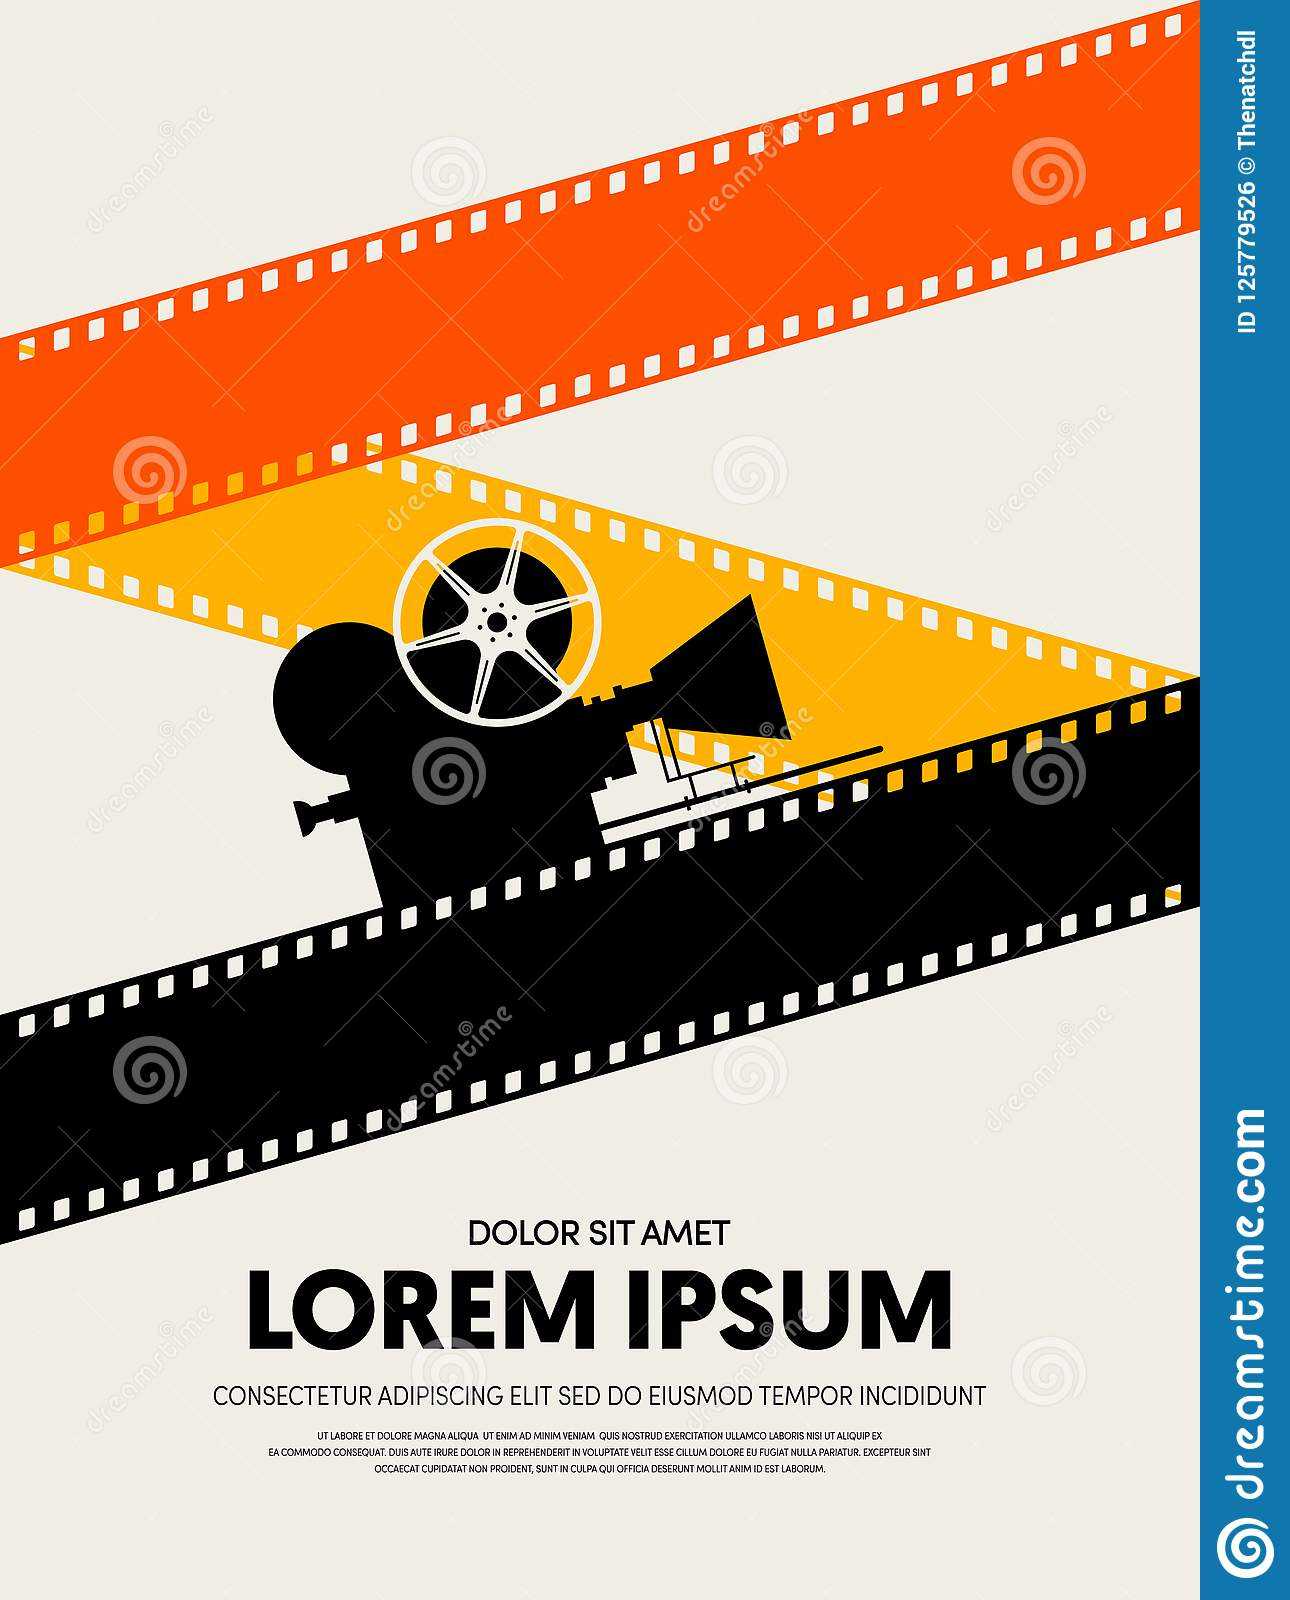 Movie And Film Festival Poster Template Design Stock Throughout Film Festival Brochure Template